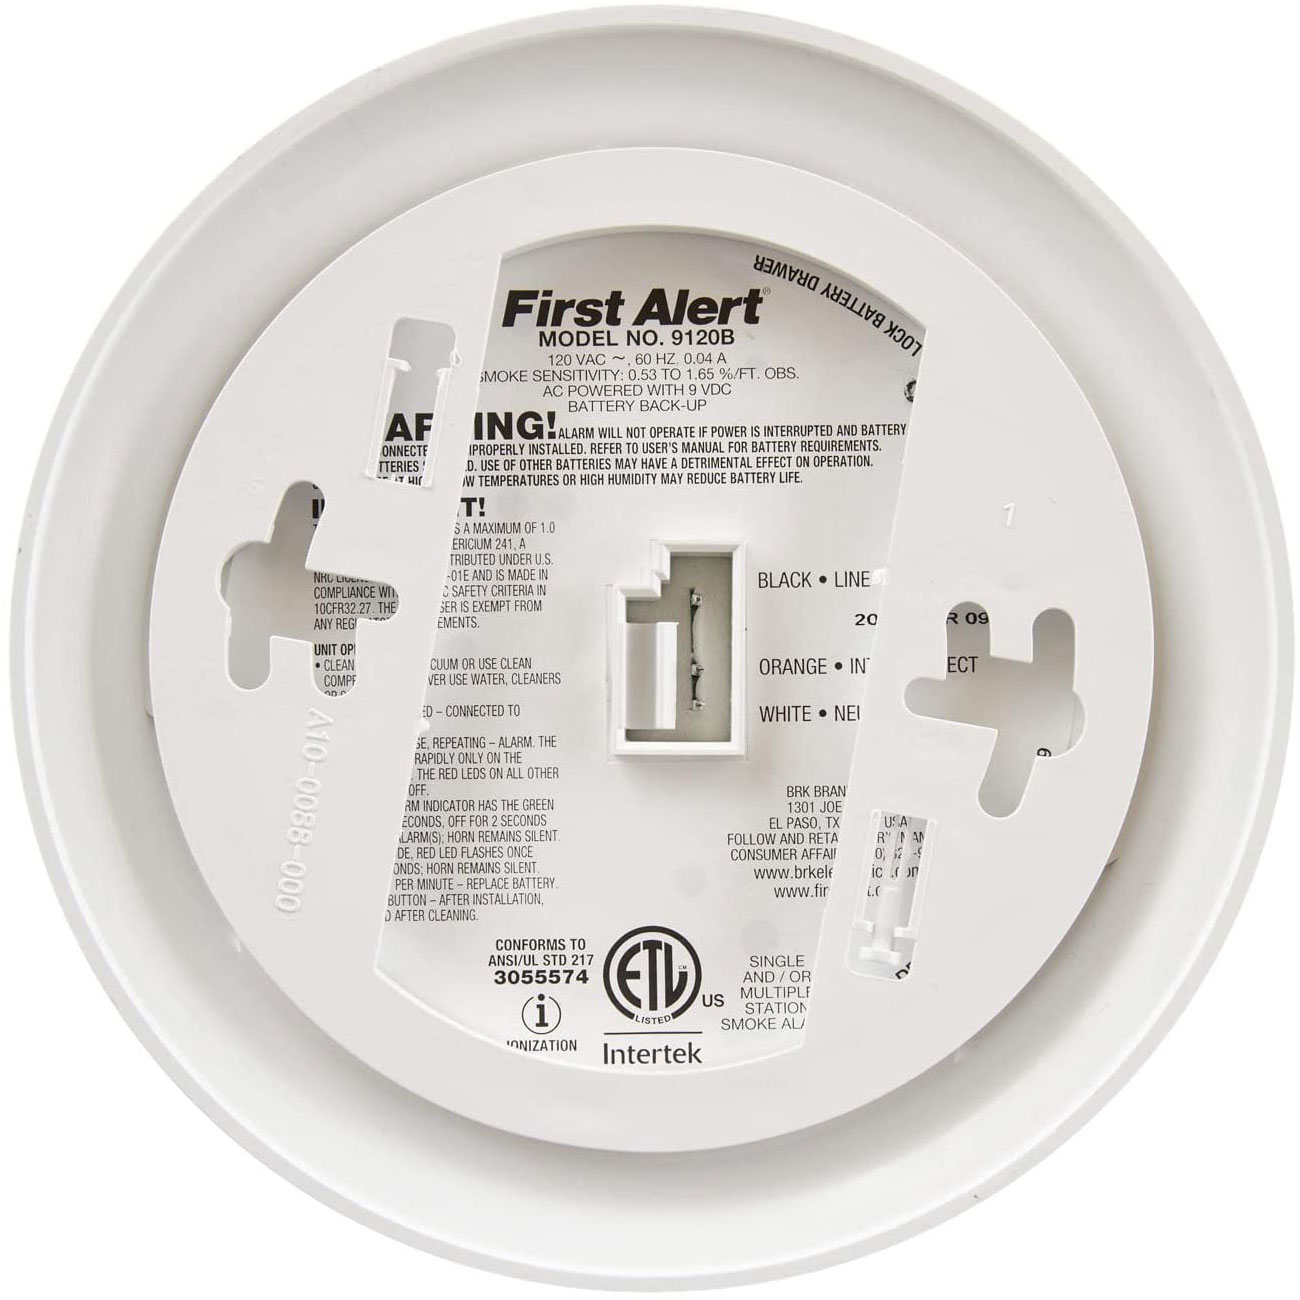 First Alert 1039939 Hardwired Smoke Alarm With Battery Backup 1 for sale online 